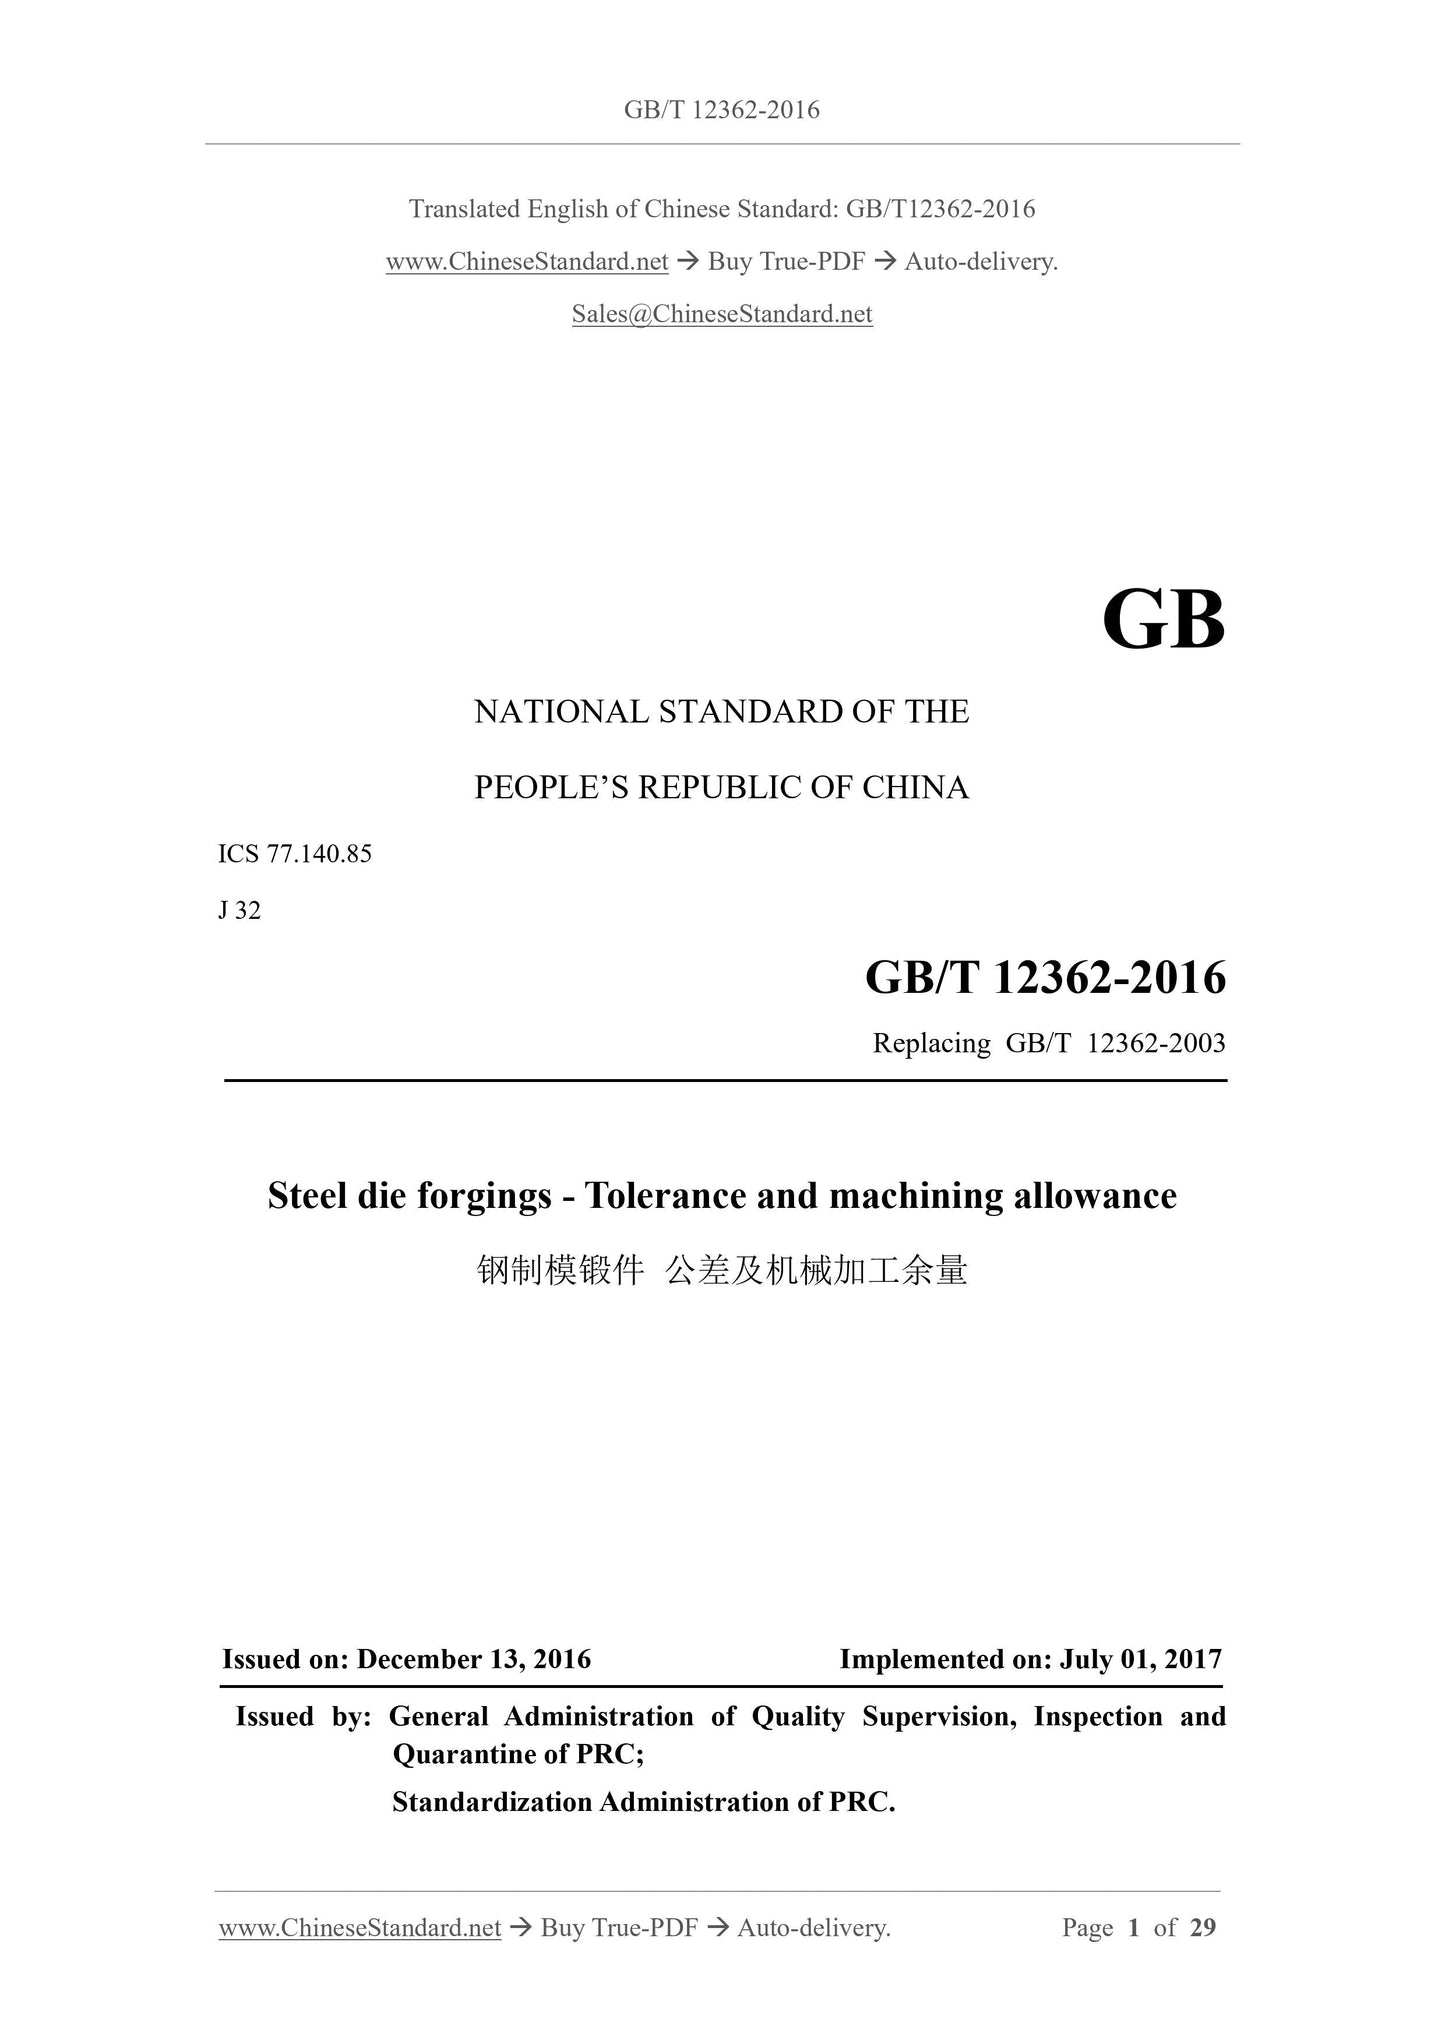 GB/T 12362-2016 Page 1